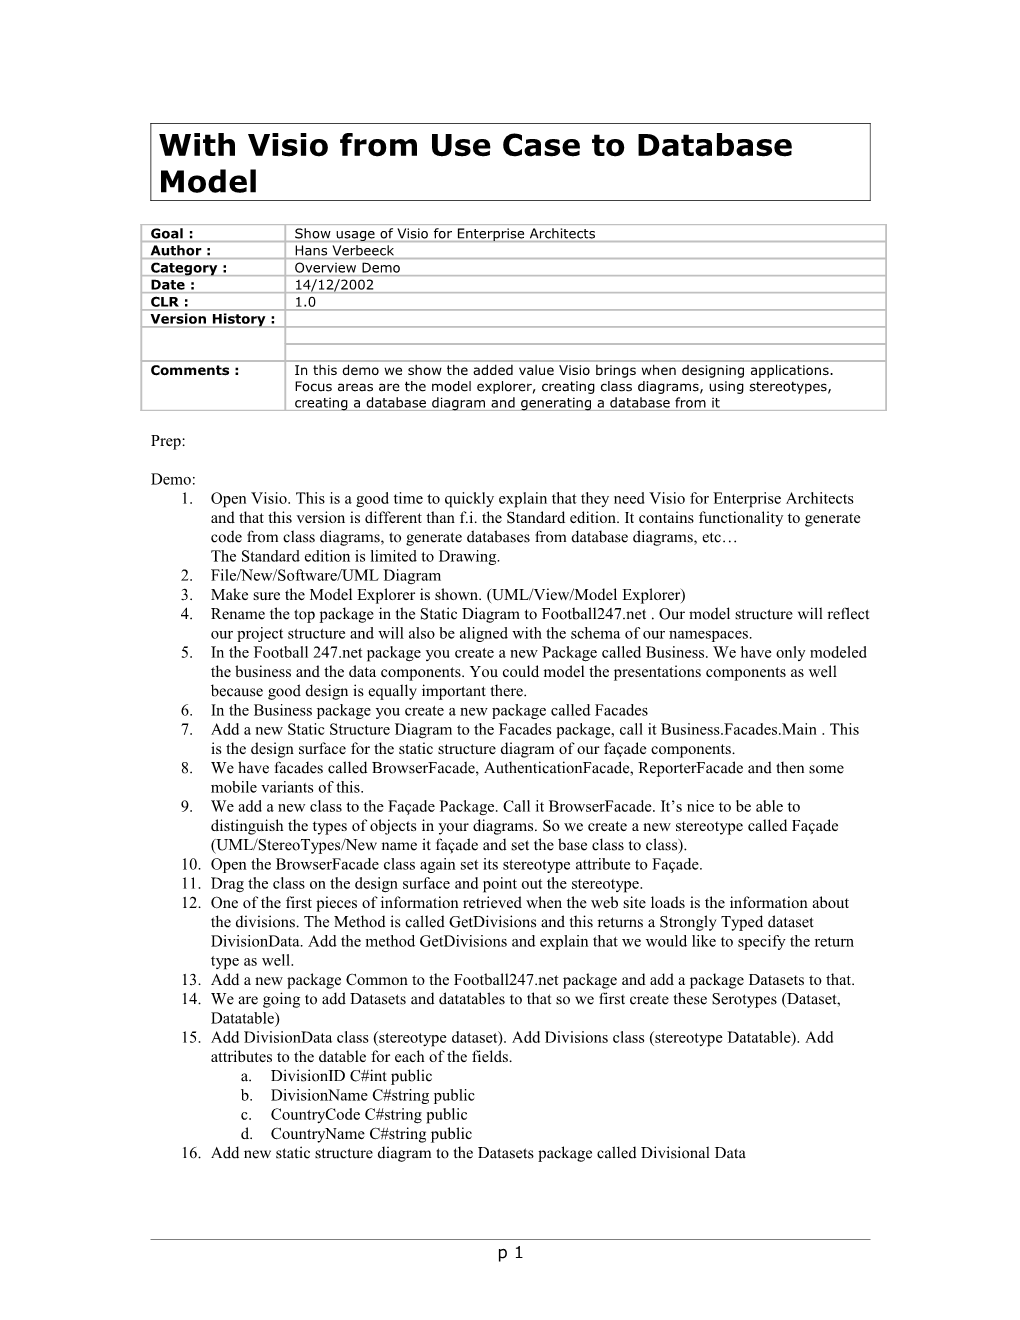 With Visio from Use Case to Database Model